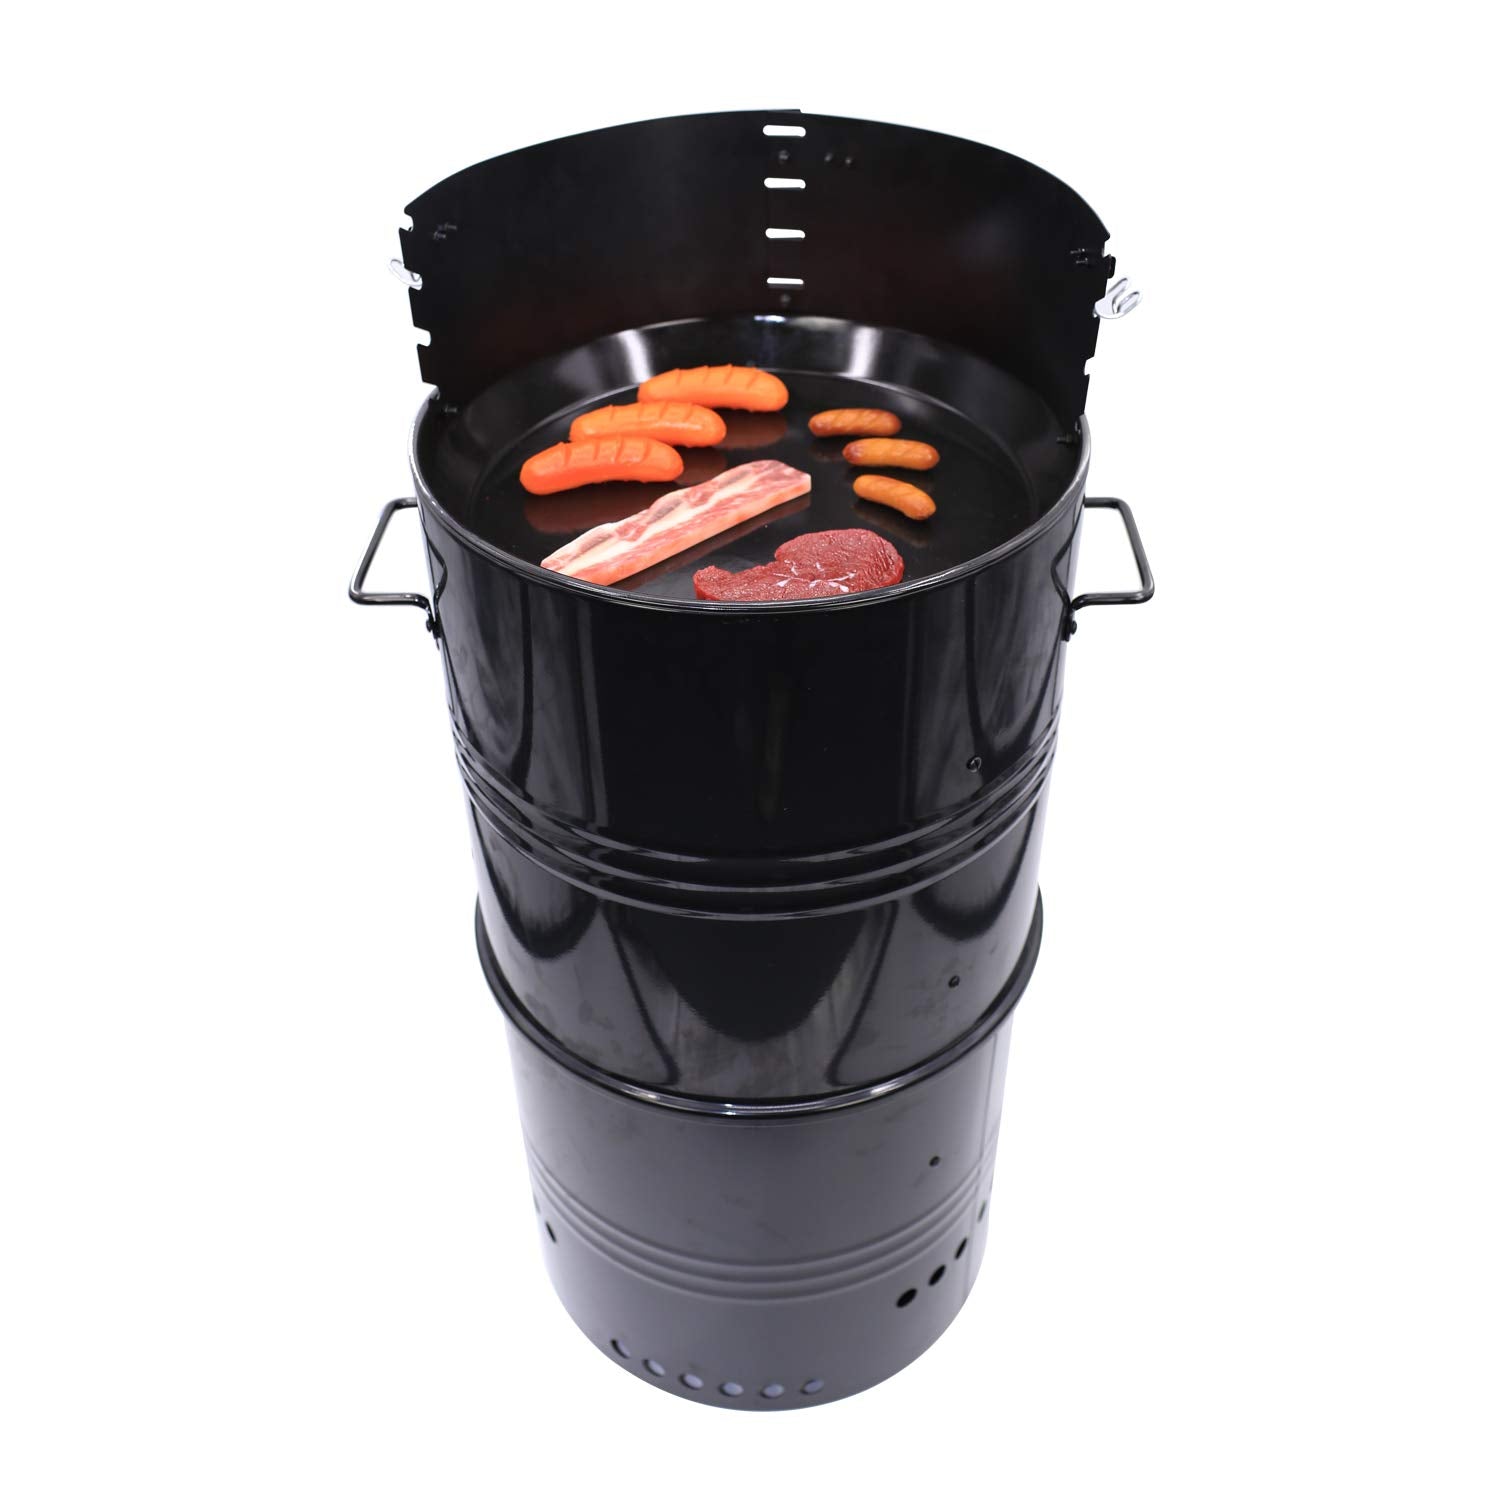 Hakka Vertical Charcoal Smoker, Multi-Function 20 Inch Barbecue and Charcoal Smoker Grill Heavy Duty Round BBQ Grill for Outdoor Cooking Camping